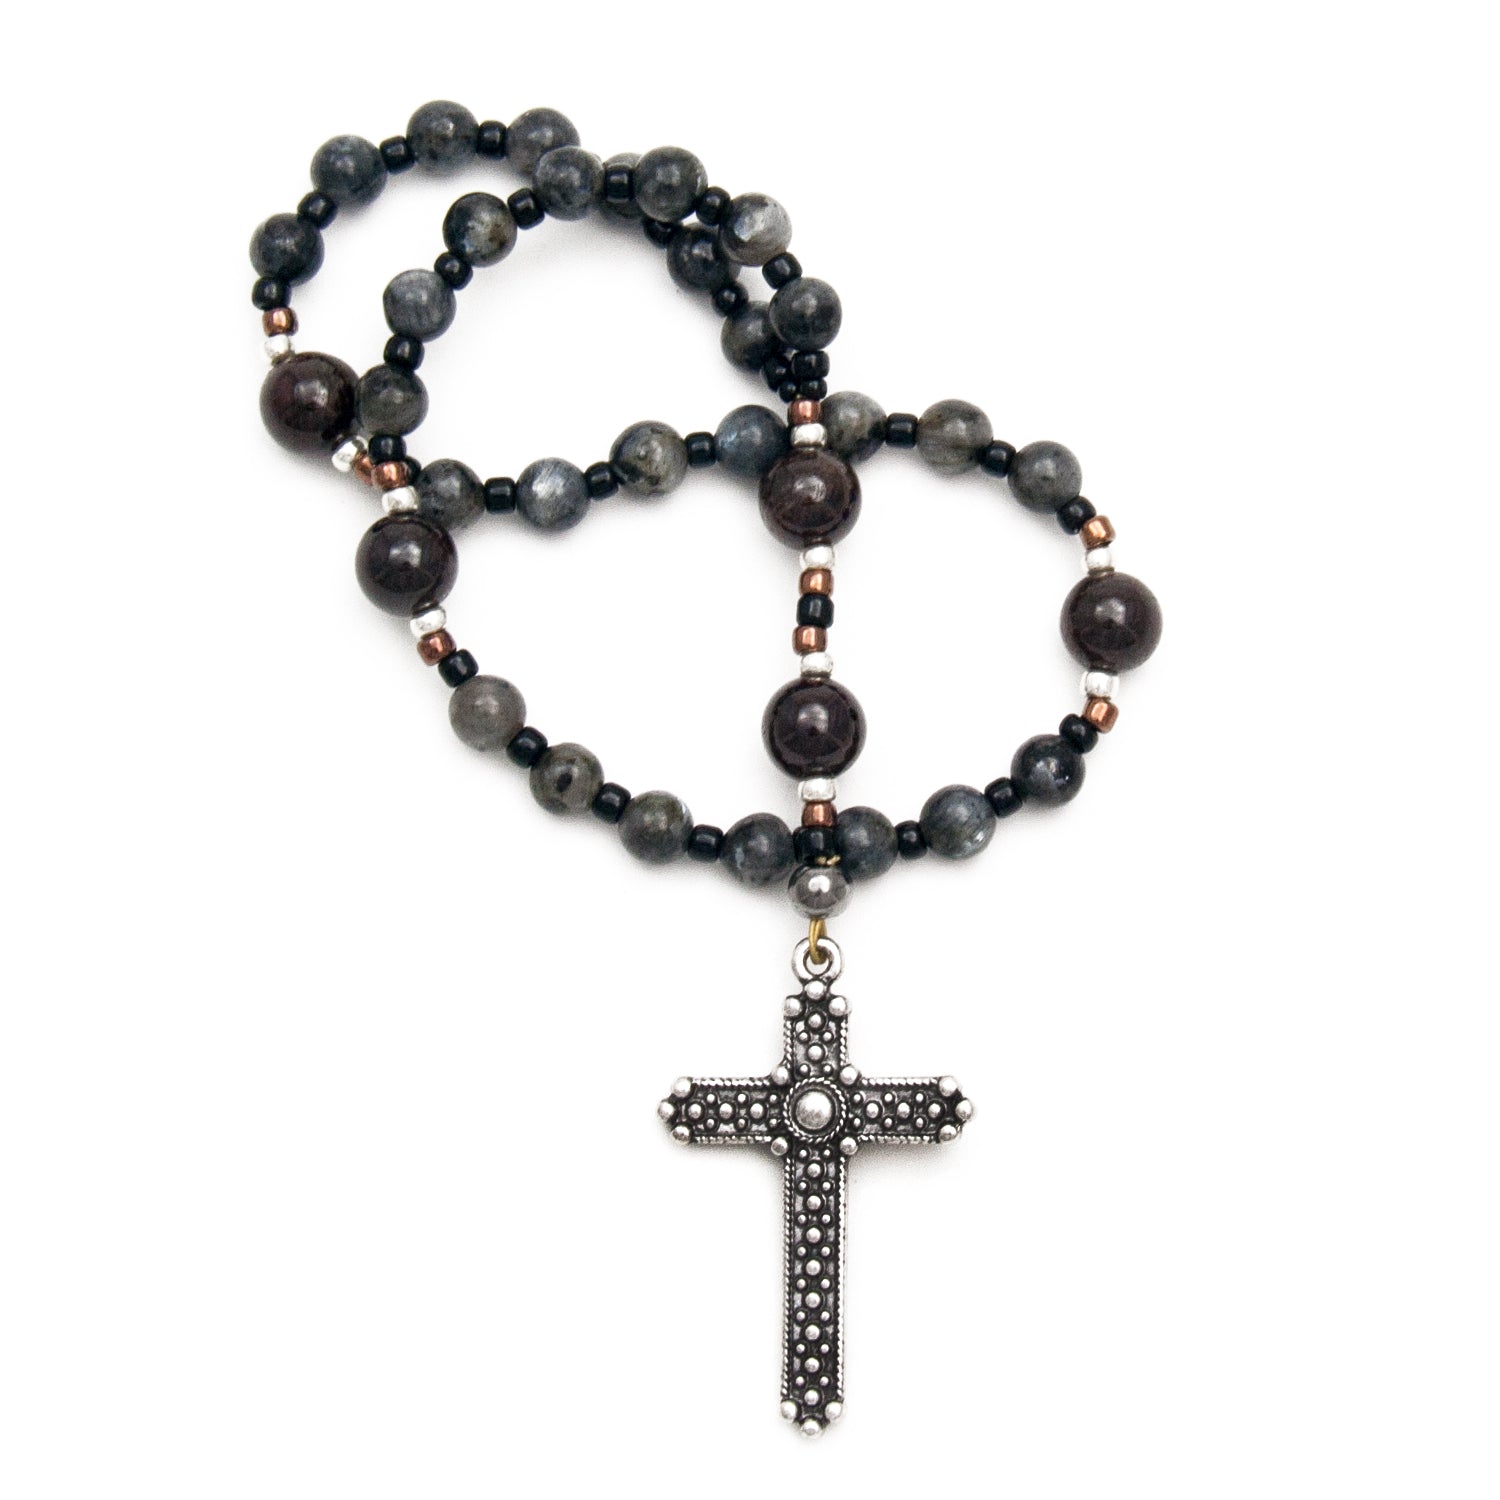 Introducing Anglican rosary bangle bracelets | Be Still Beads